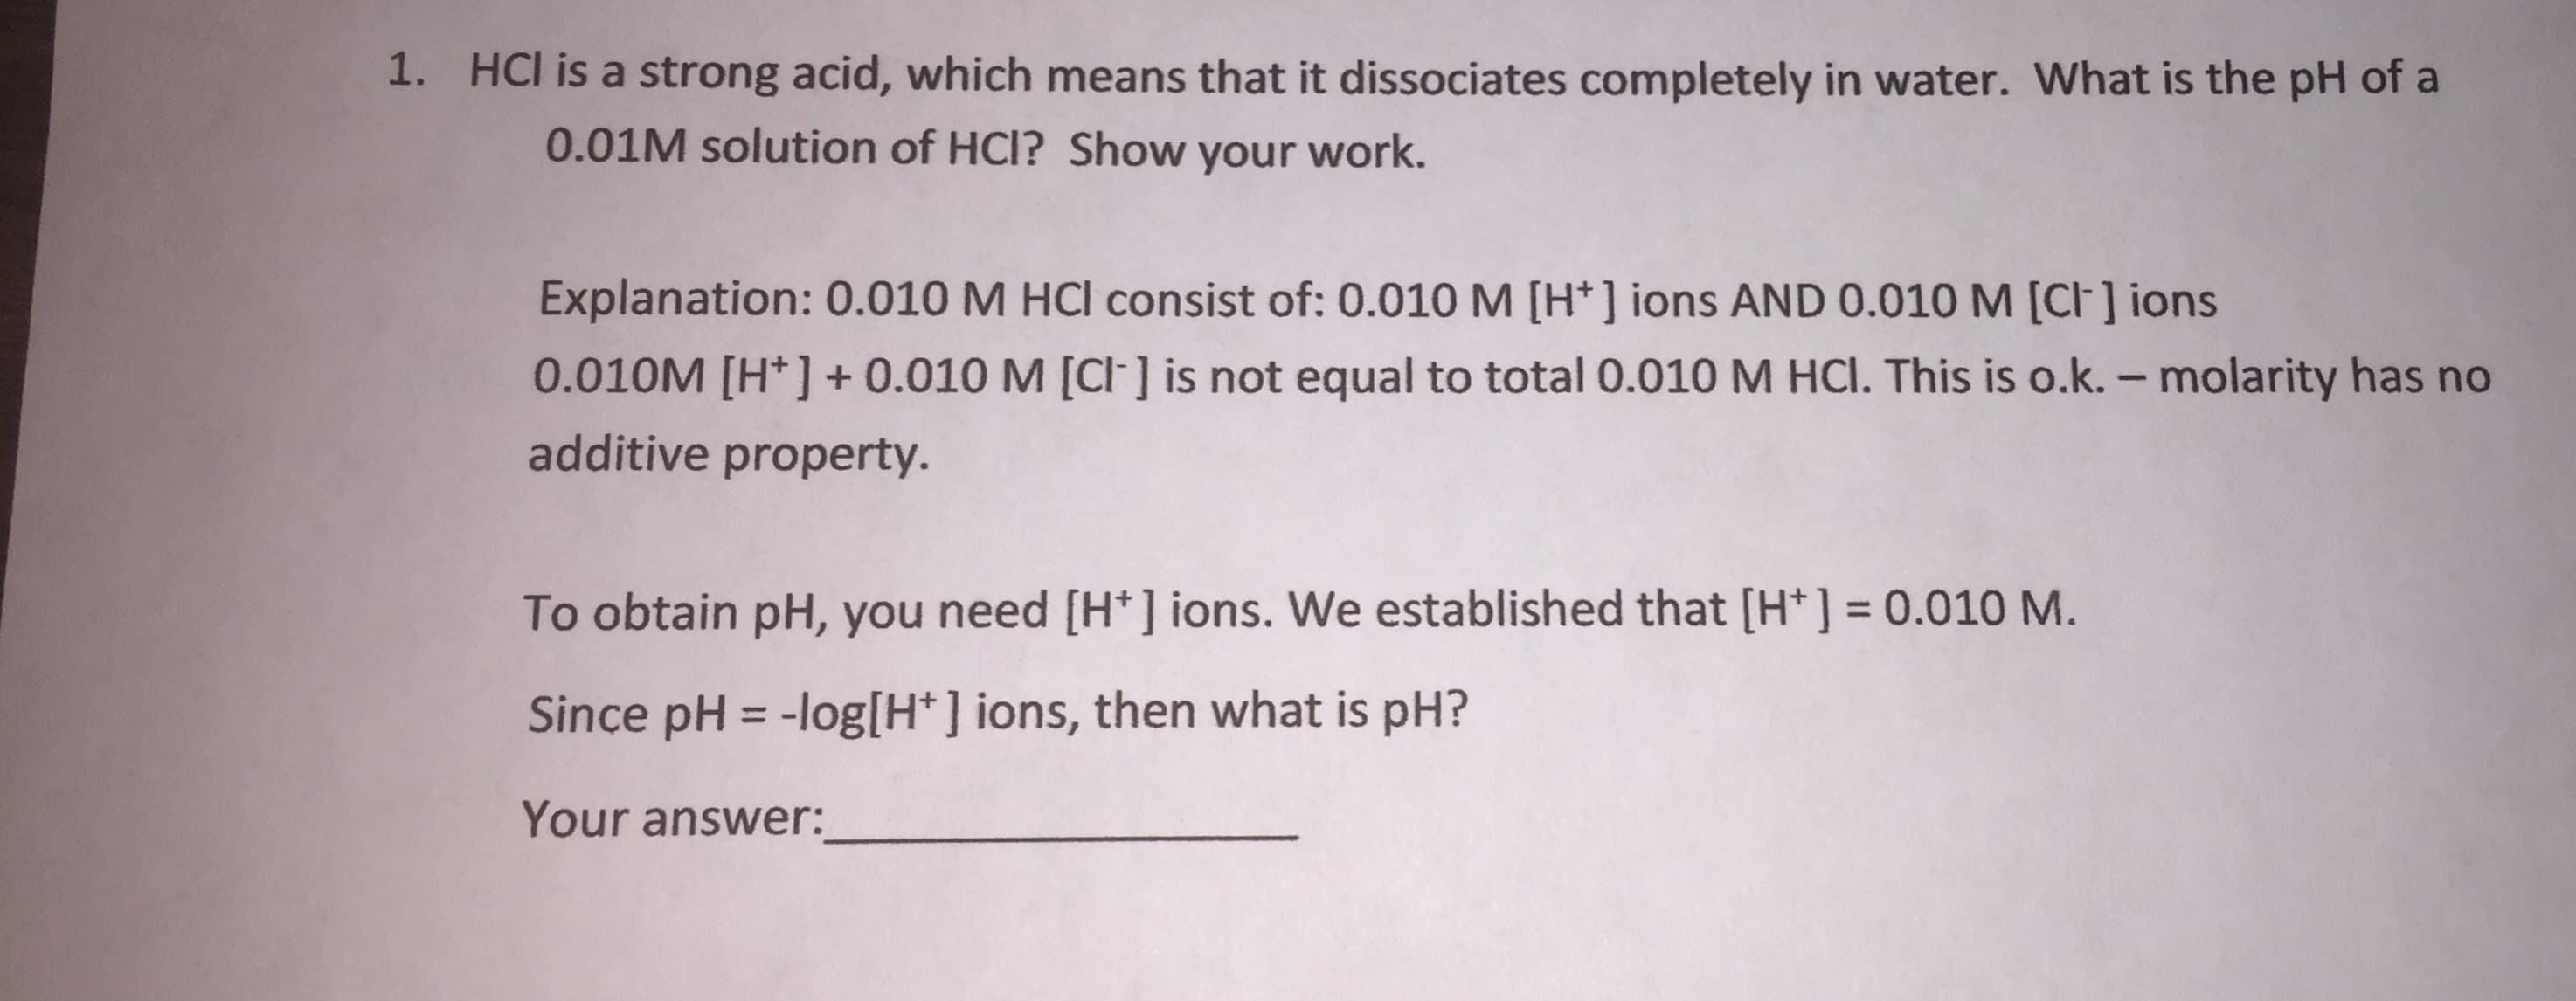 1. HCl is a strong acid, which means that it dissociates completely in water. What is the pH of a
0.01M solution of HCI? Show your work.
Explanation: 0.010 M HCI consist of: 0.010M [H*] ions AND 0.010 M [CI] ions
0.010M [H*] + 0.010 M [CI] is not equal to total 0.010 M HCI. This is o.k. – molarity has no
additive property.
To obtain pH, you need [H* ] ions. We established that [H*] = 0.010 M.
%3D
Since pH = -log[H*] ions, then what is pH?
%3D
Your answer:
